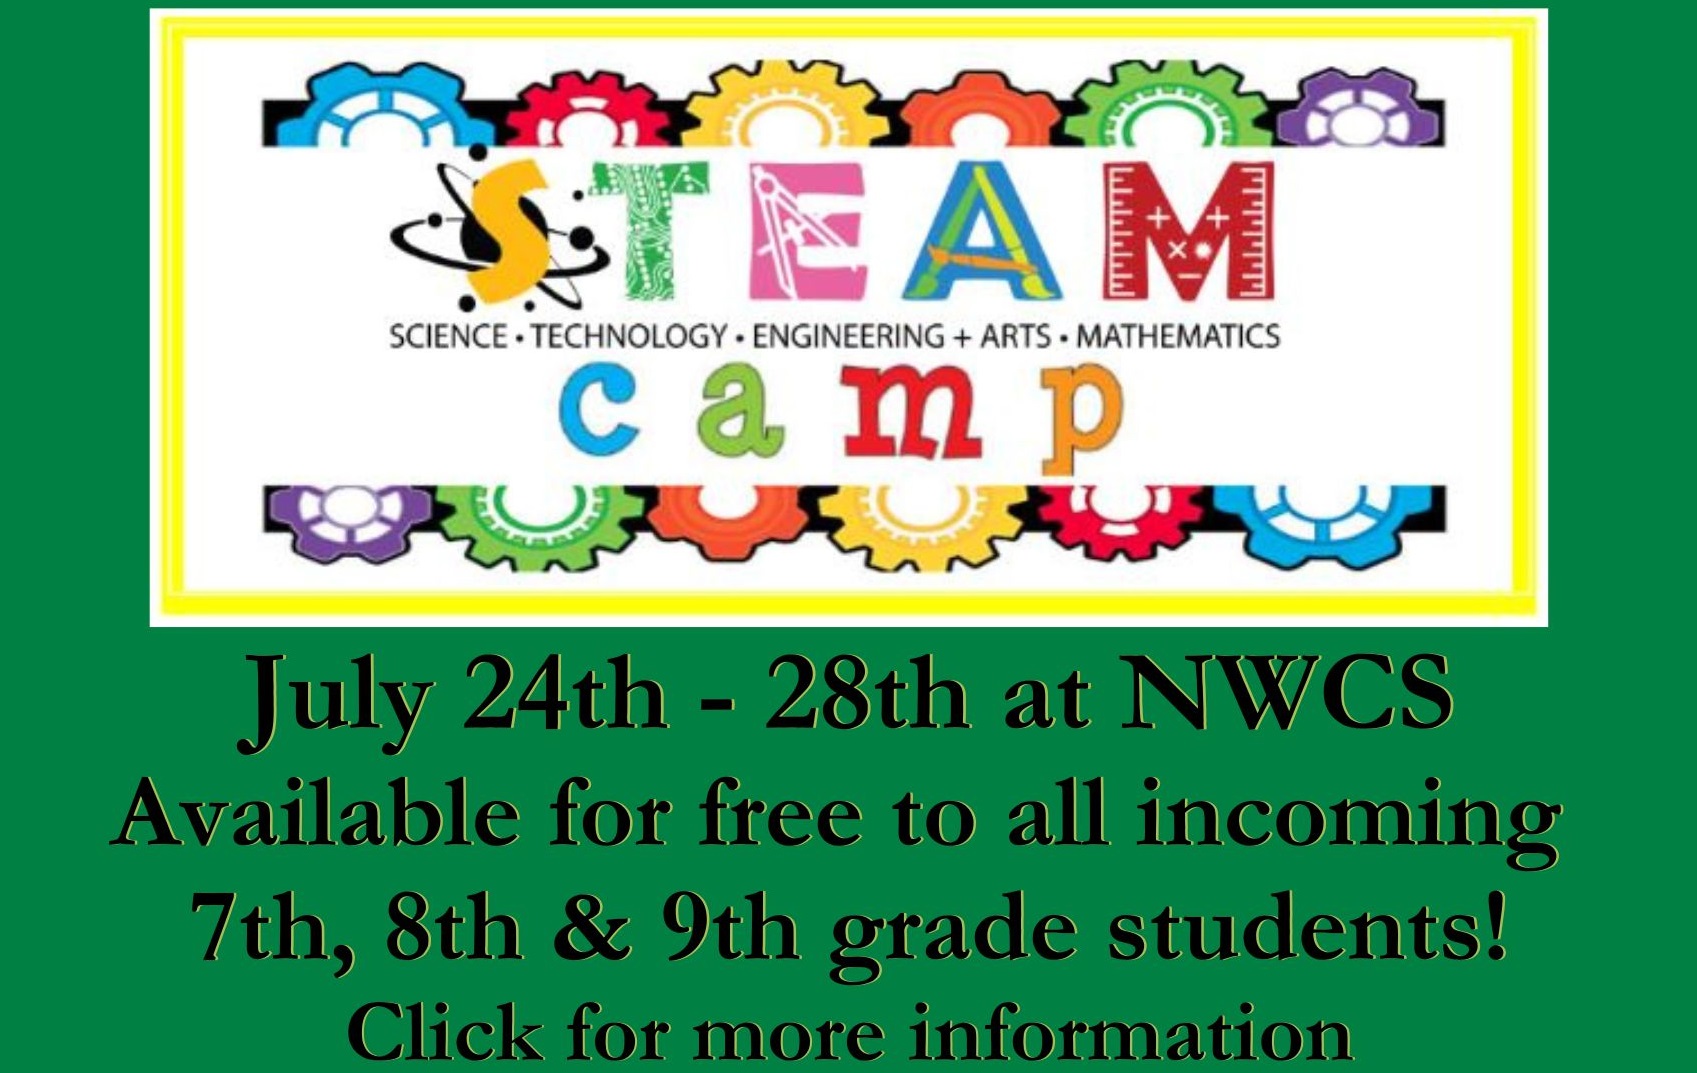 STEAM Camp, free for all incoming 7th, 8th & 9th grade students. July 24th - 28th at NWCS. Click for more information.